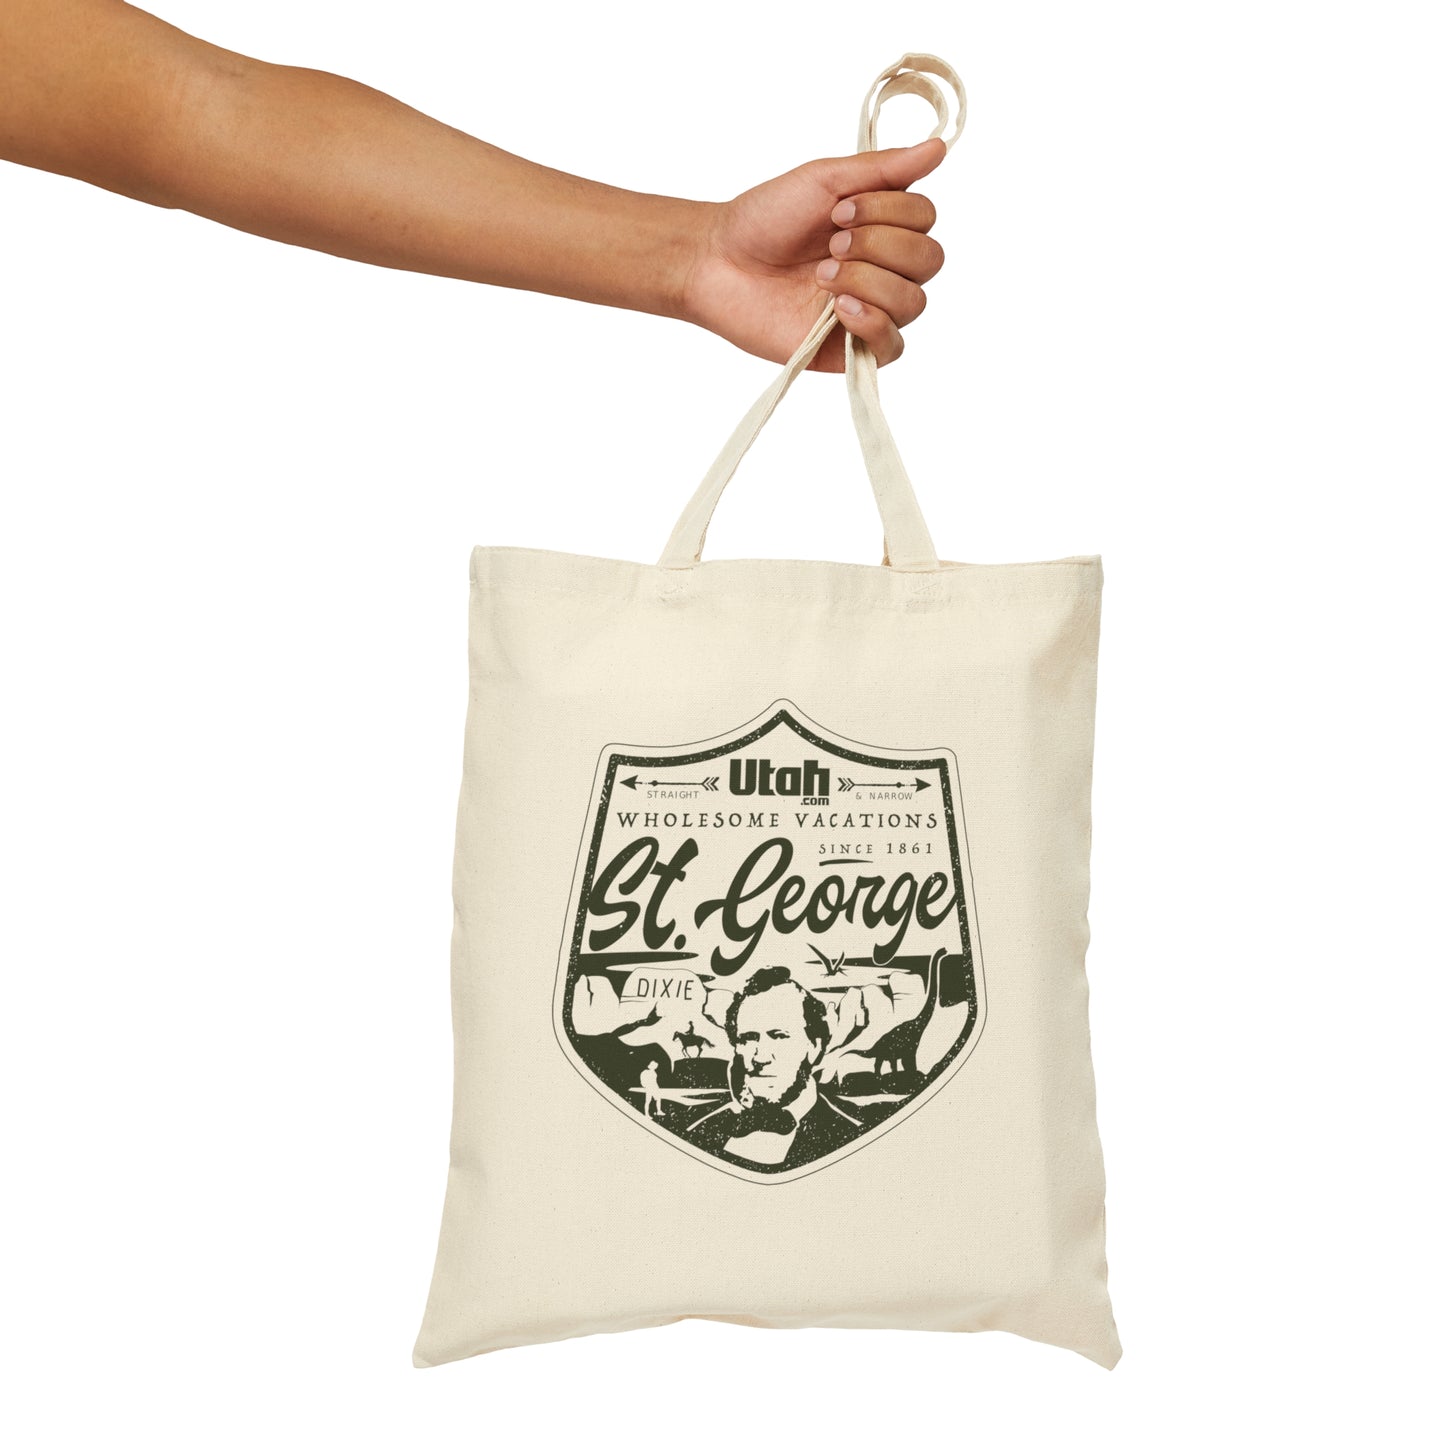 "Wholesome Vacations" Cotton Canvas Tote Bag